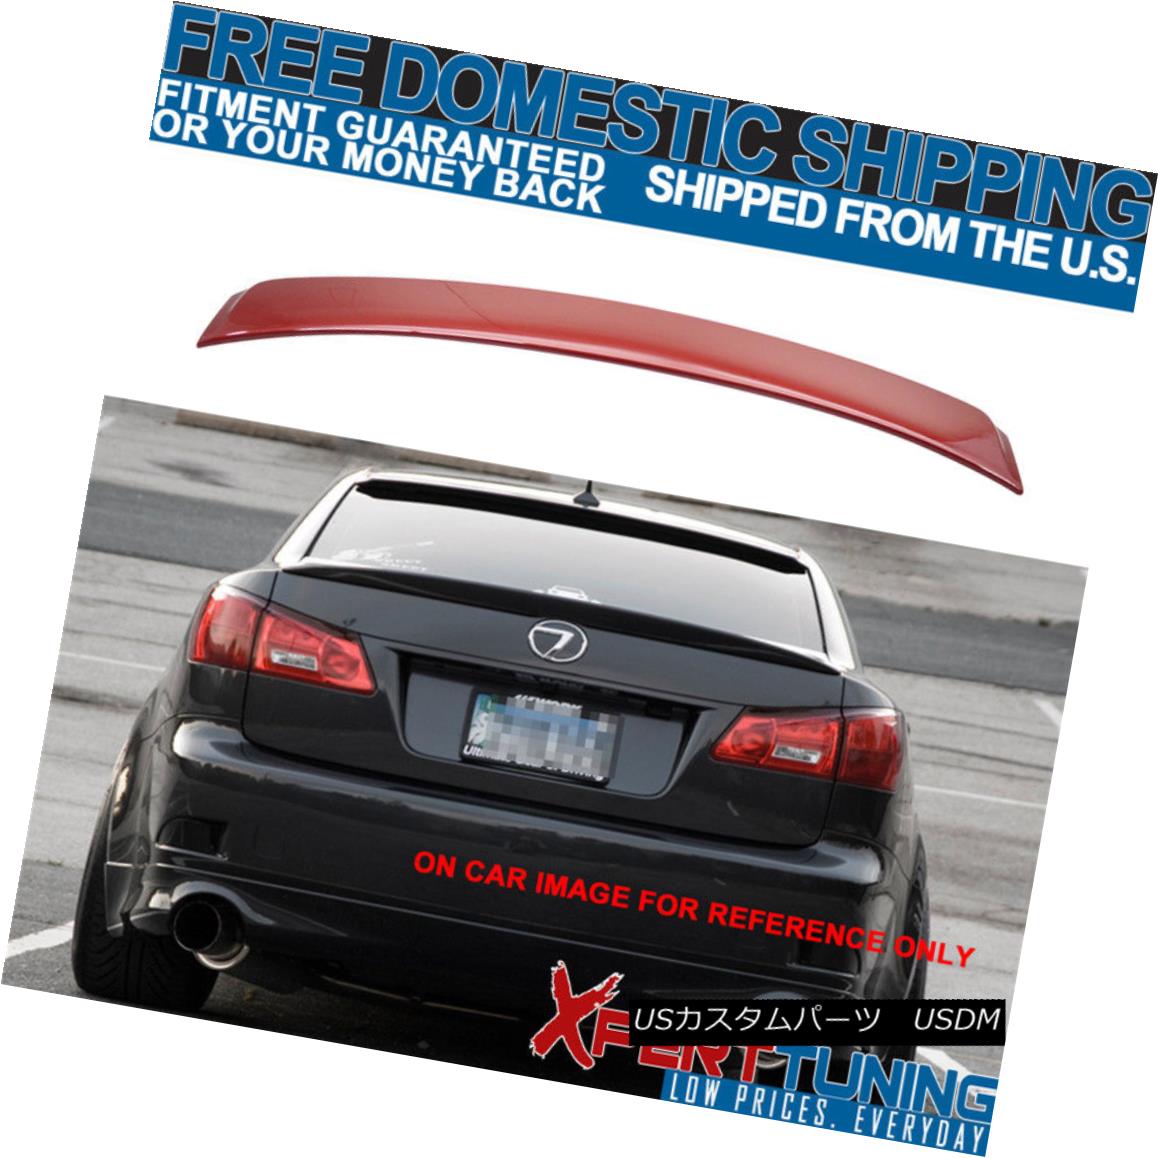 STOCK USA Painted #202/212 For LEXUS IS250 IS220D ABS WINDOW ROOF SPOILER